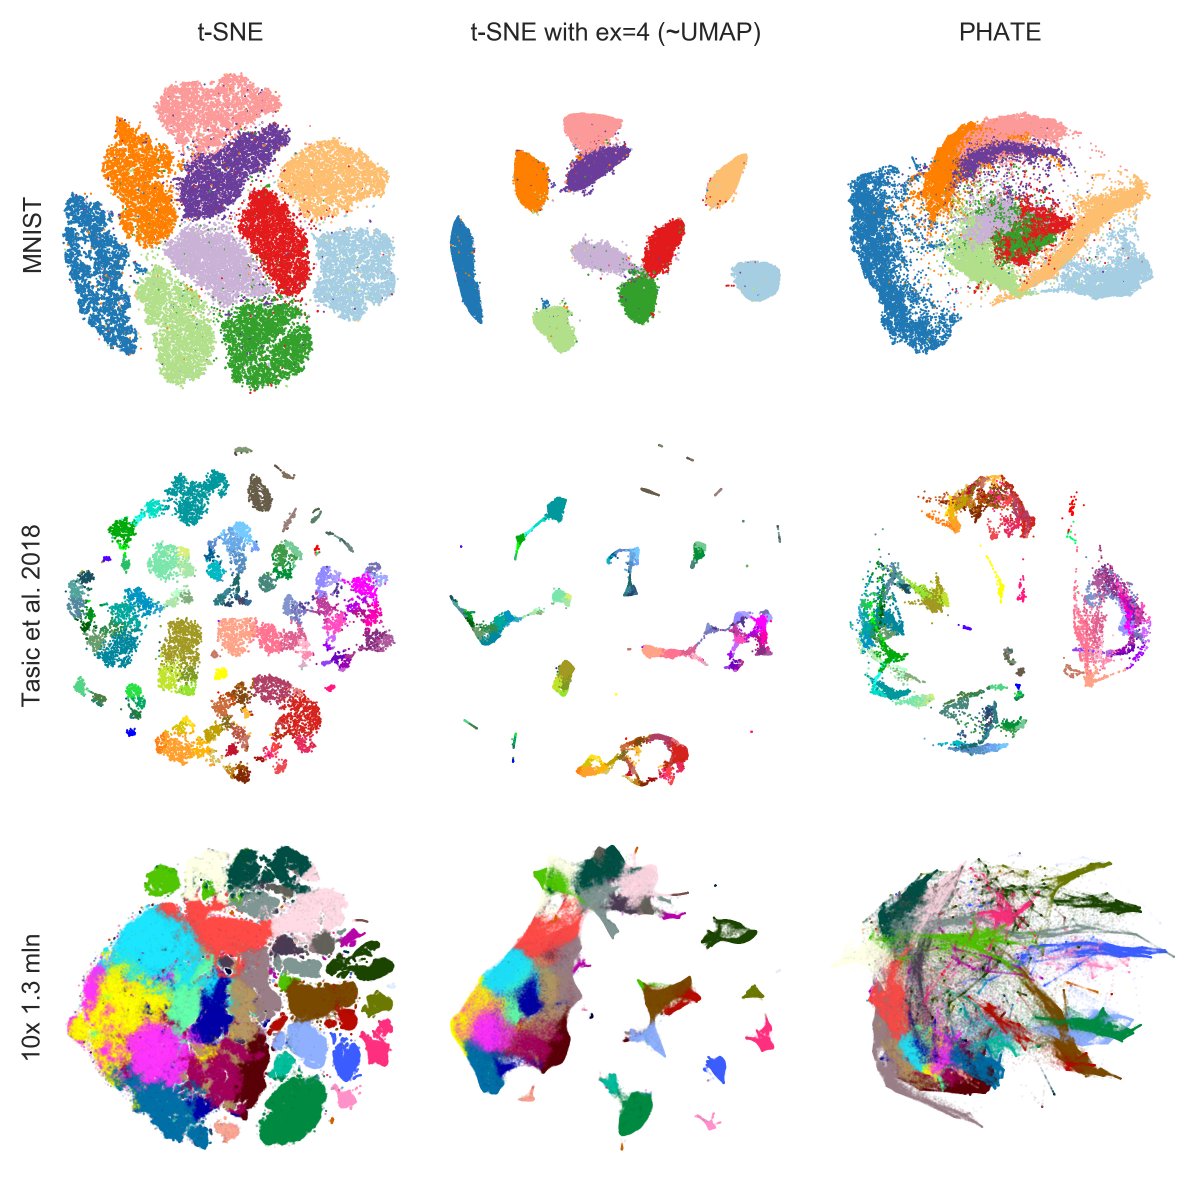 Here is a summary for all three datasets.As I said, I think the PHATE paper is interesting, and there are some nice ideas in there, and the method might very well work fine for some developmental datasets -- but I certainly cannot agree that one should "ditch" t-SNE/UMAP. [7/7]